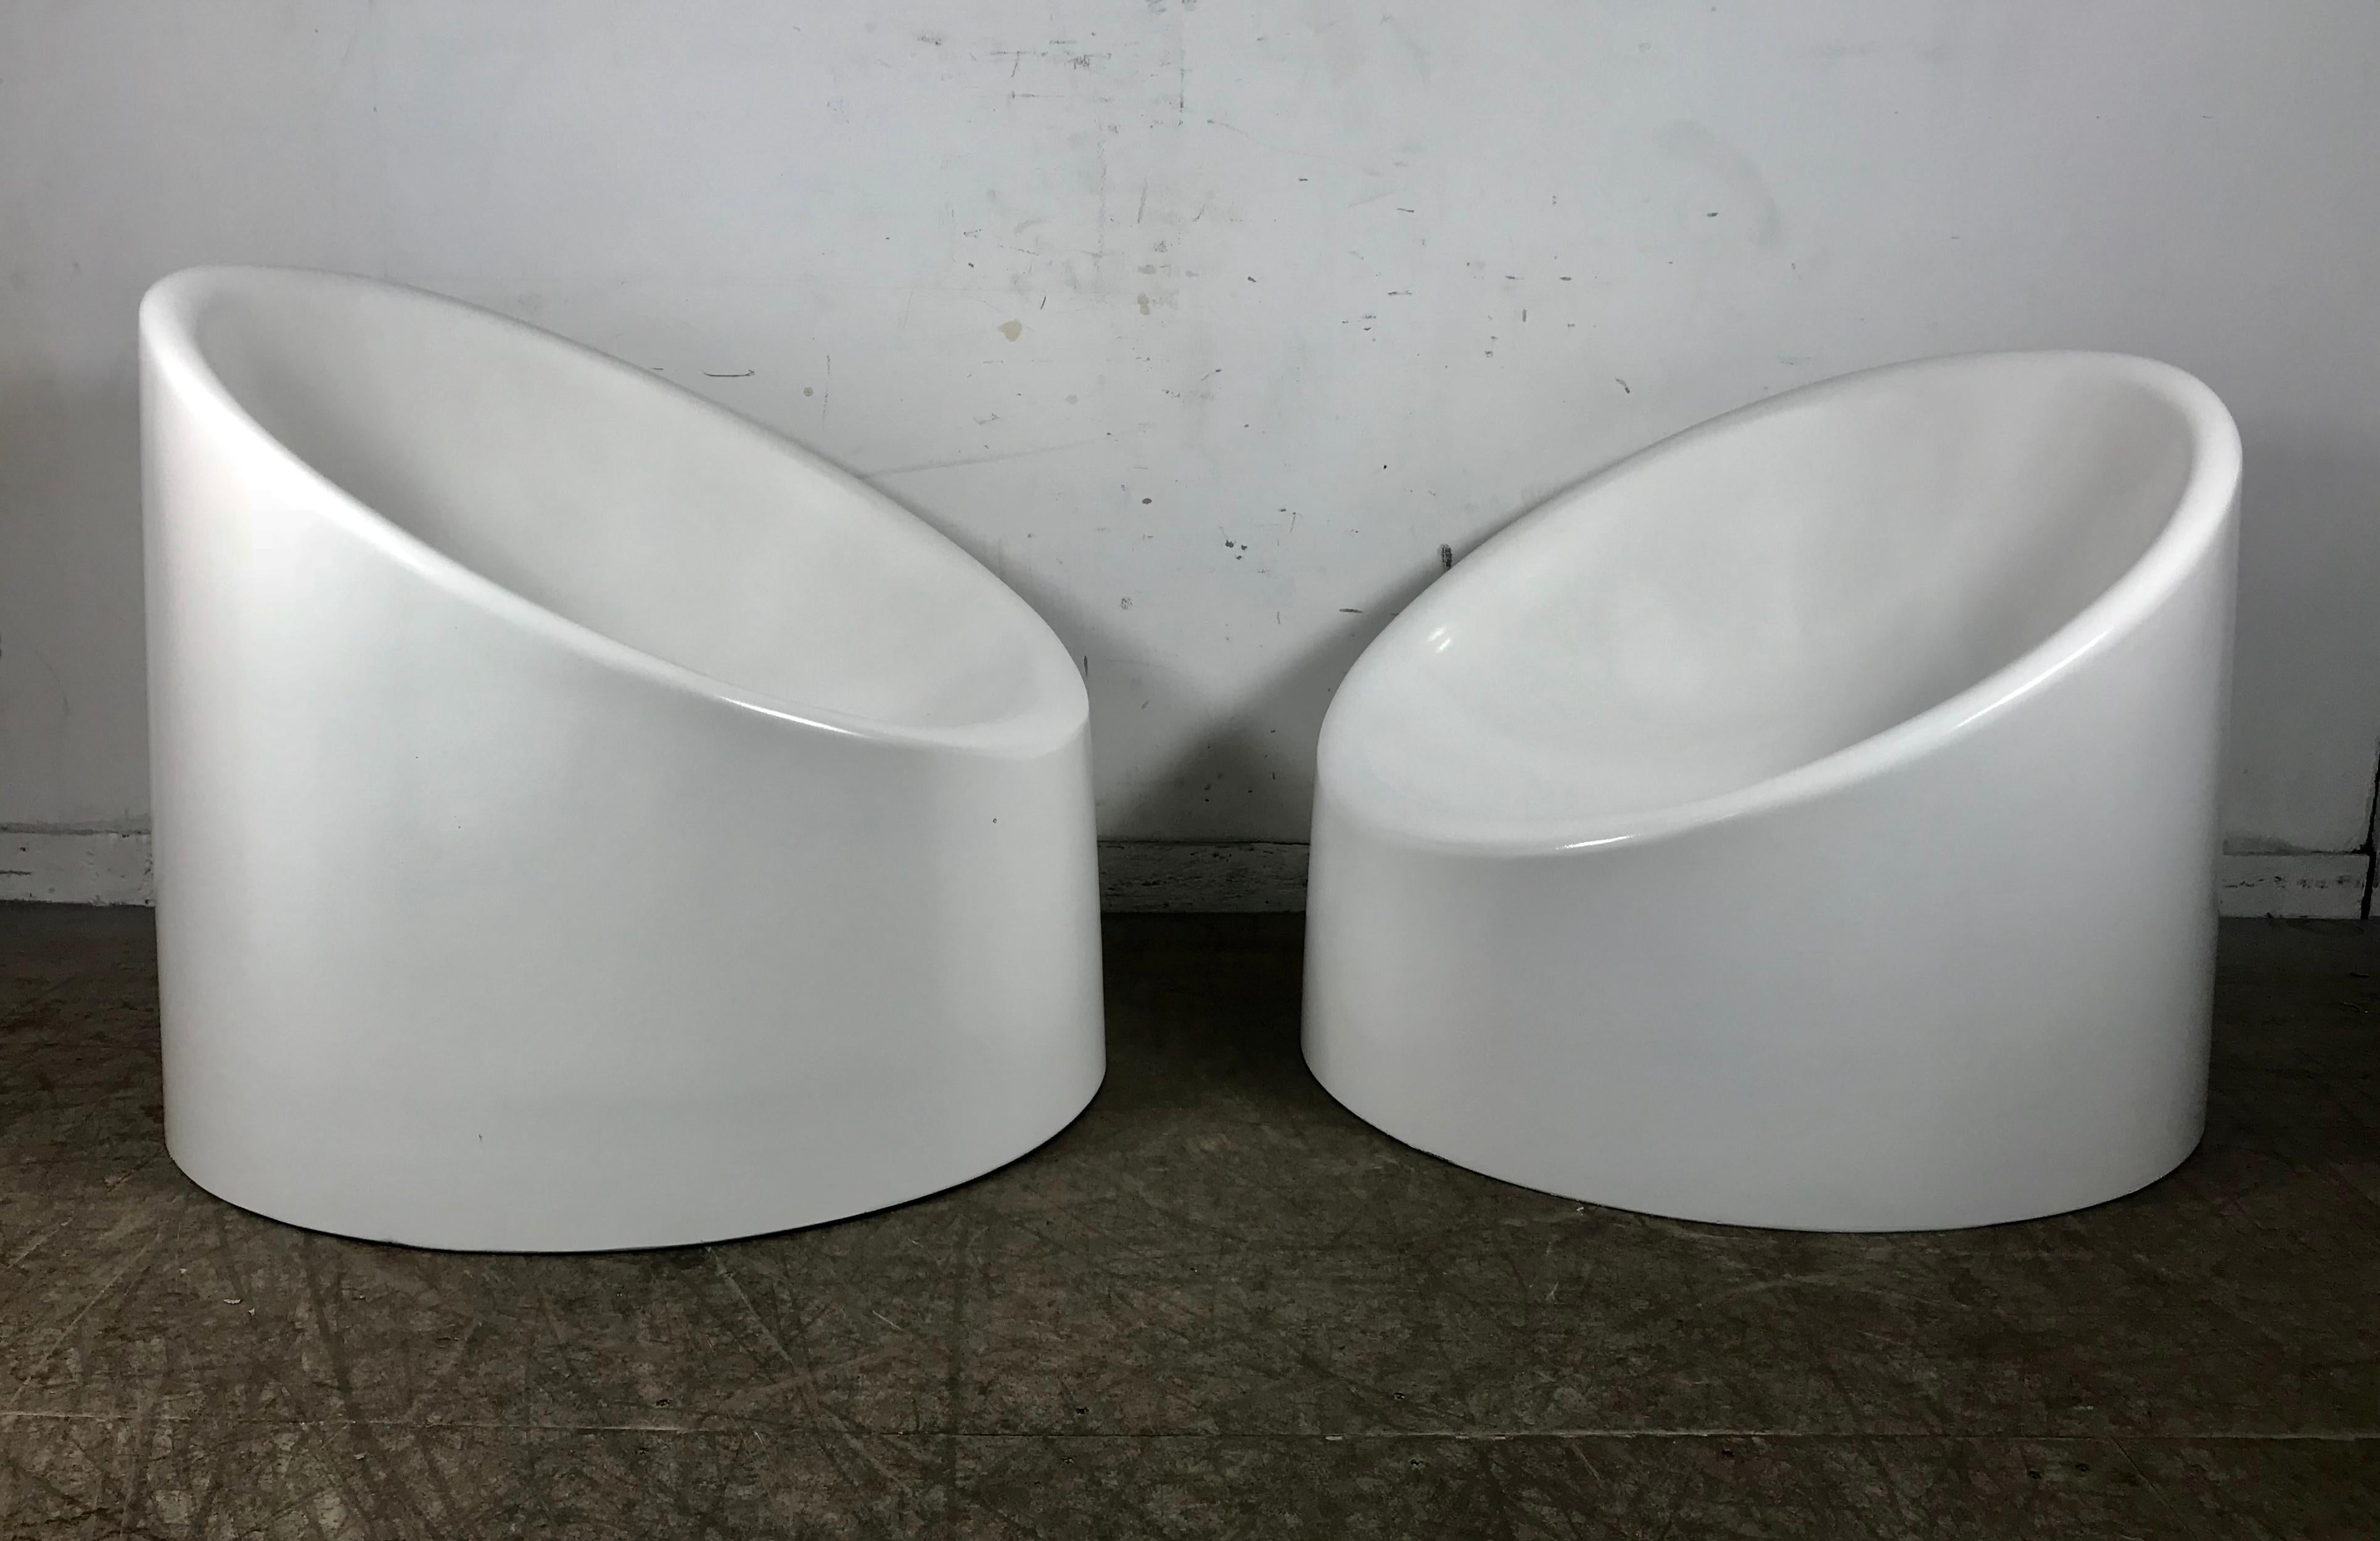 American Pop Modern Space Age Fiberglass Pod Chairs After Wendell Castle